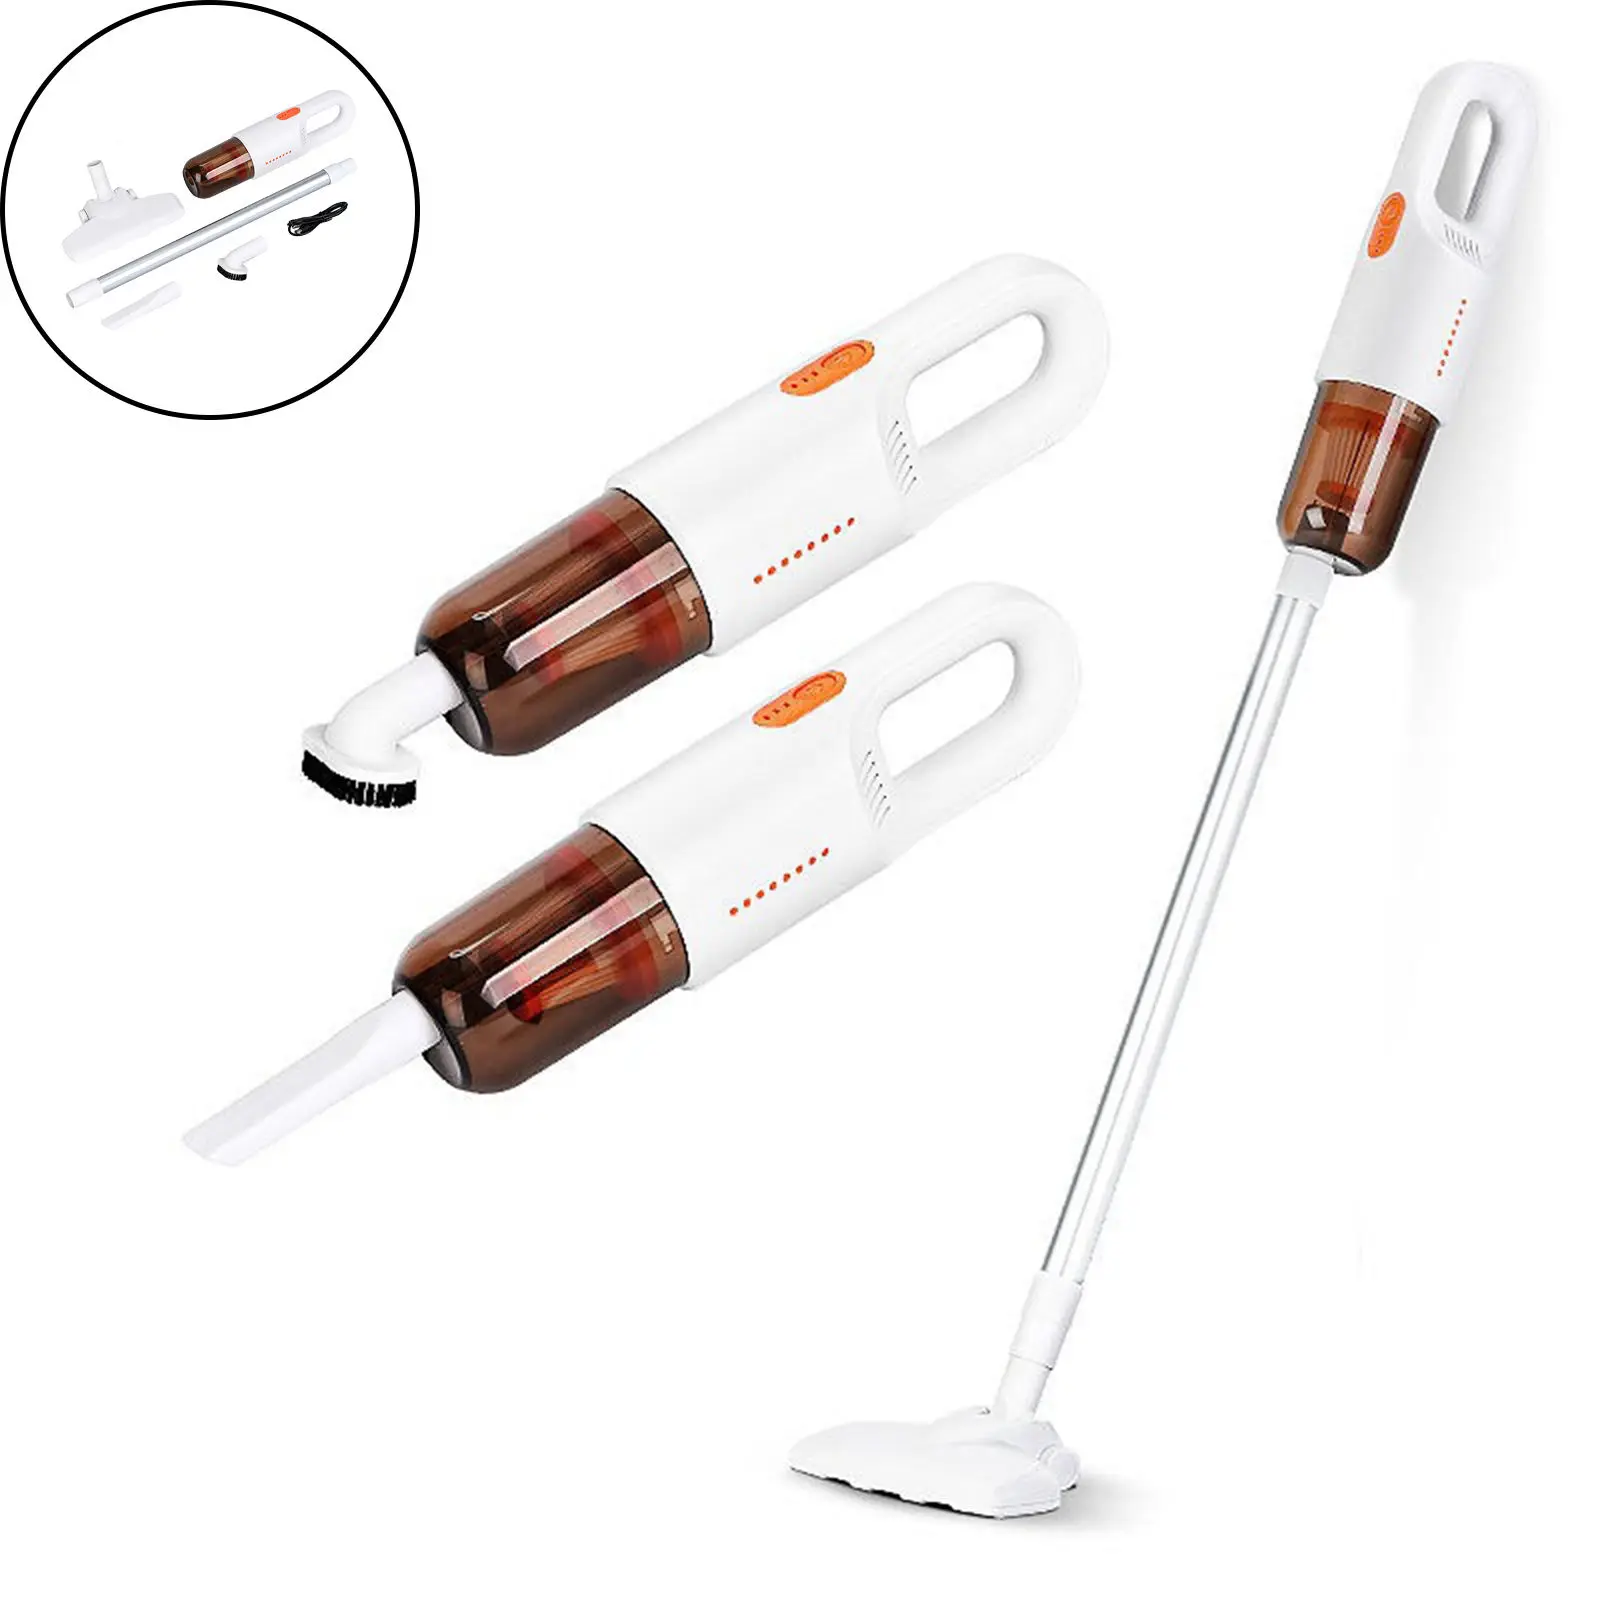 Wireless Vacuum Cleaner Strong Suction High Power 2 in 1 Cleaning Tool for Home Sofa Office Dust Pet Hair